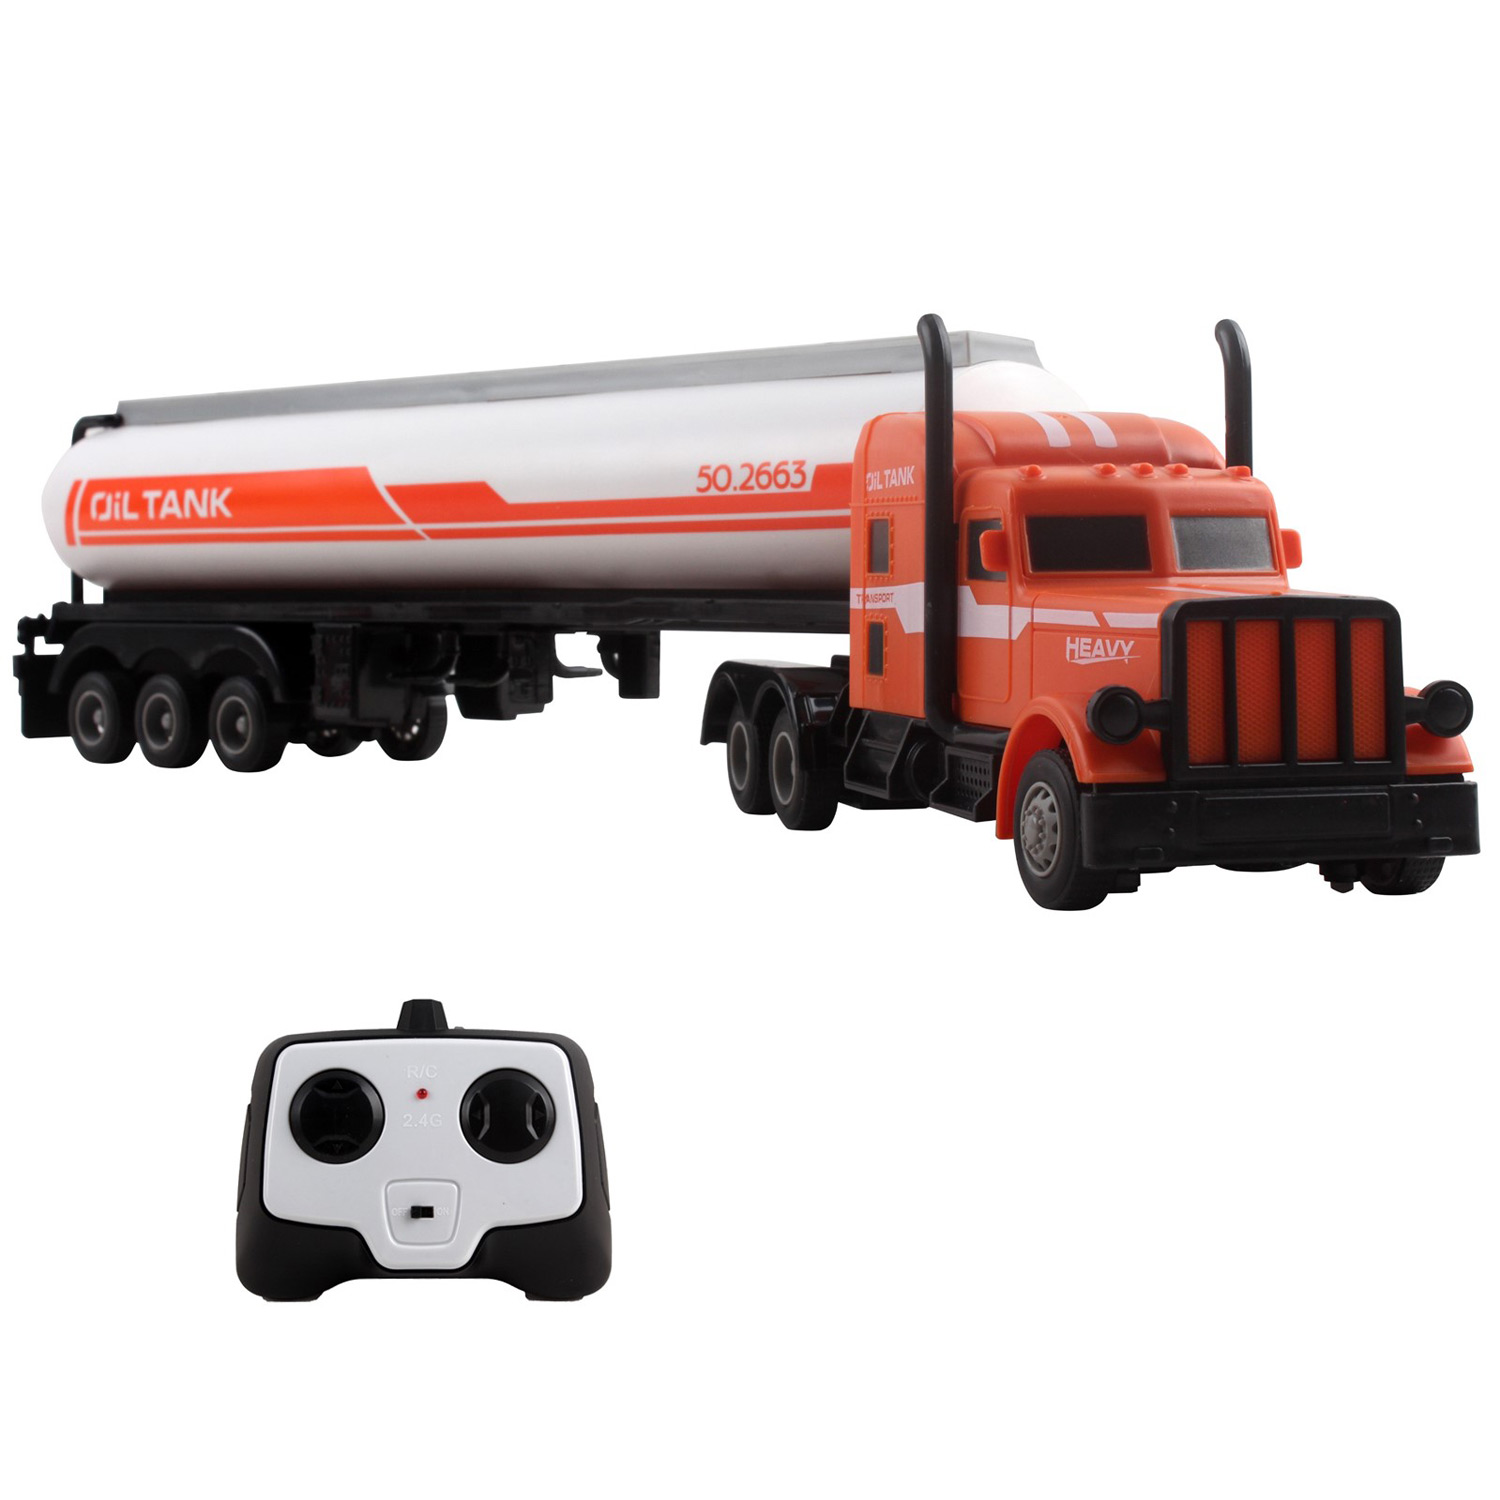 Large RC Semi Truck Fuel Trailer 18.7" 2.4Ghz Fast Speed 1:16 Scale Electric Oil Hauler Rechargeable Remote Control Kids Big Rig Toy Carrier Transporter Cargo Vehicle Perfect Gift For Children